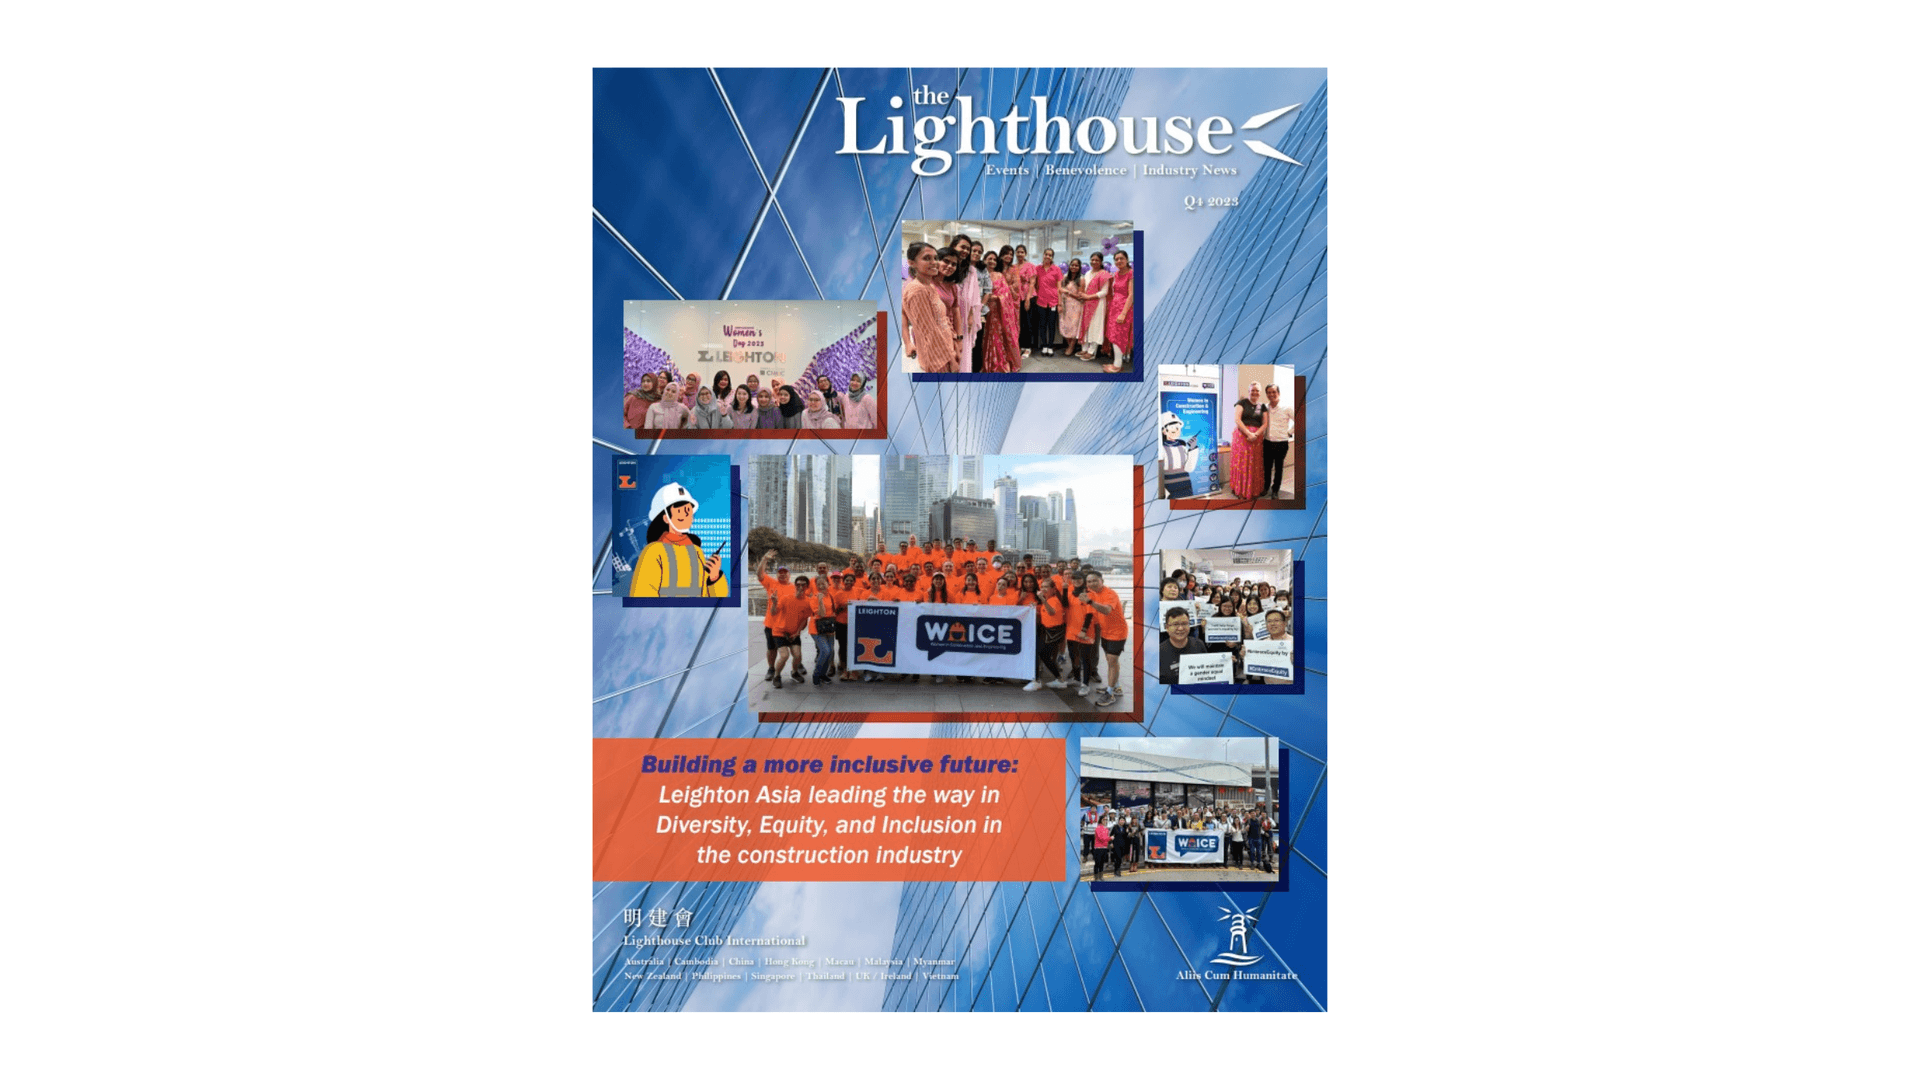 Building a more inclusive future: Leighton Asia leading the way in Diversity, Equity, and Inclusion in the construction industry